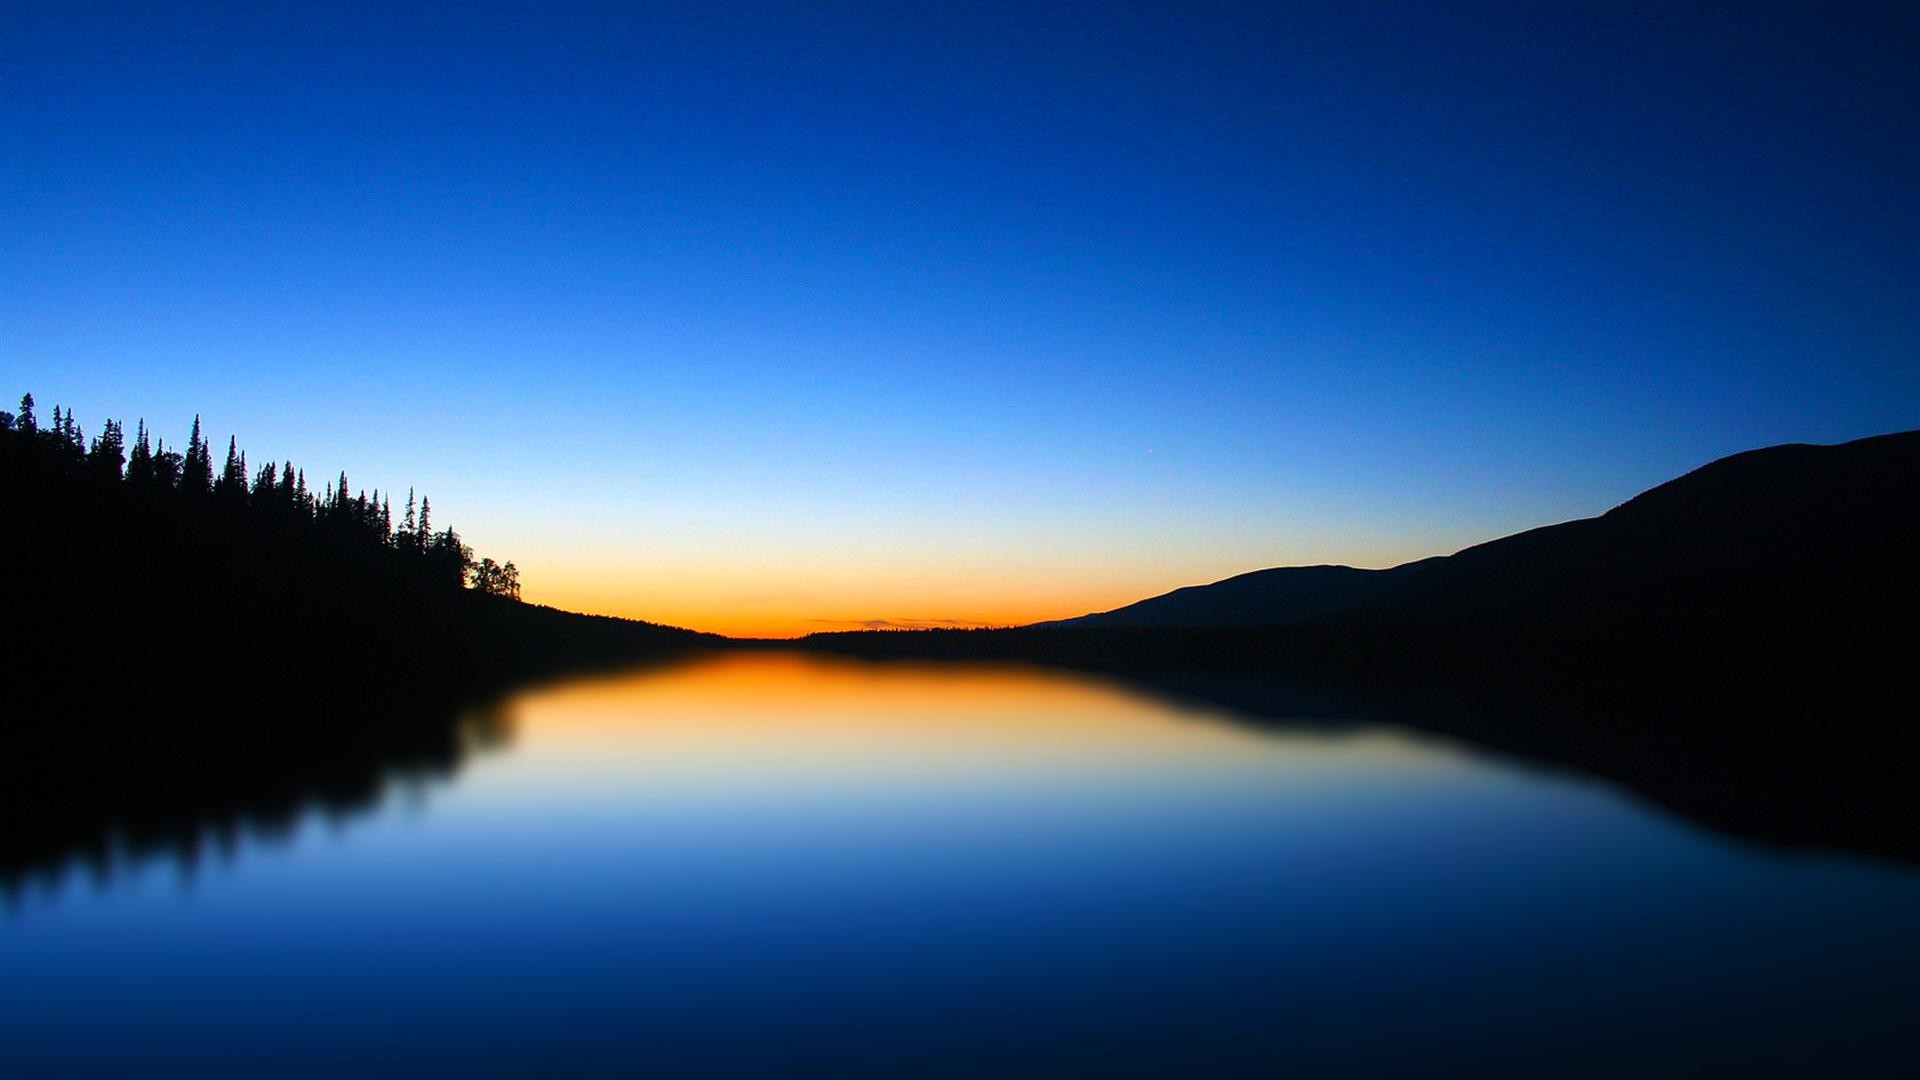 1920x1080  Hd Blue lake scenic wallpaper for windows wide  wallpapers:1280x800,1440x900,1680x1050